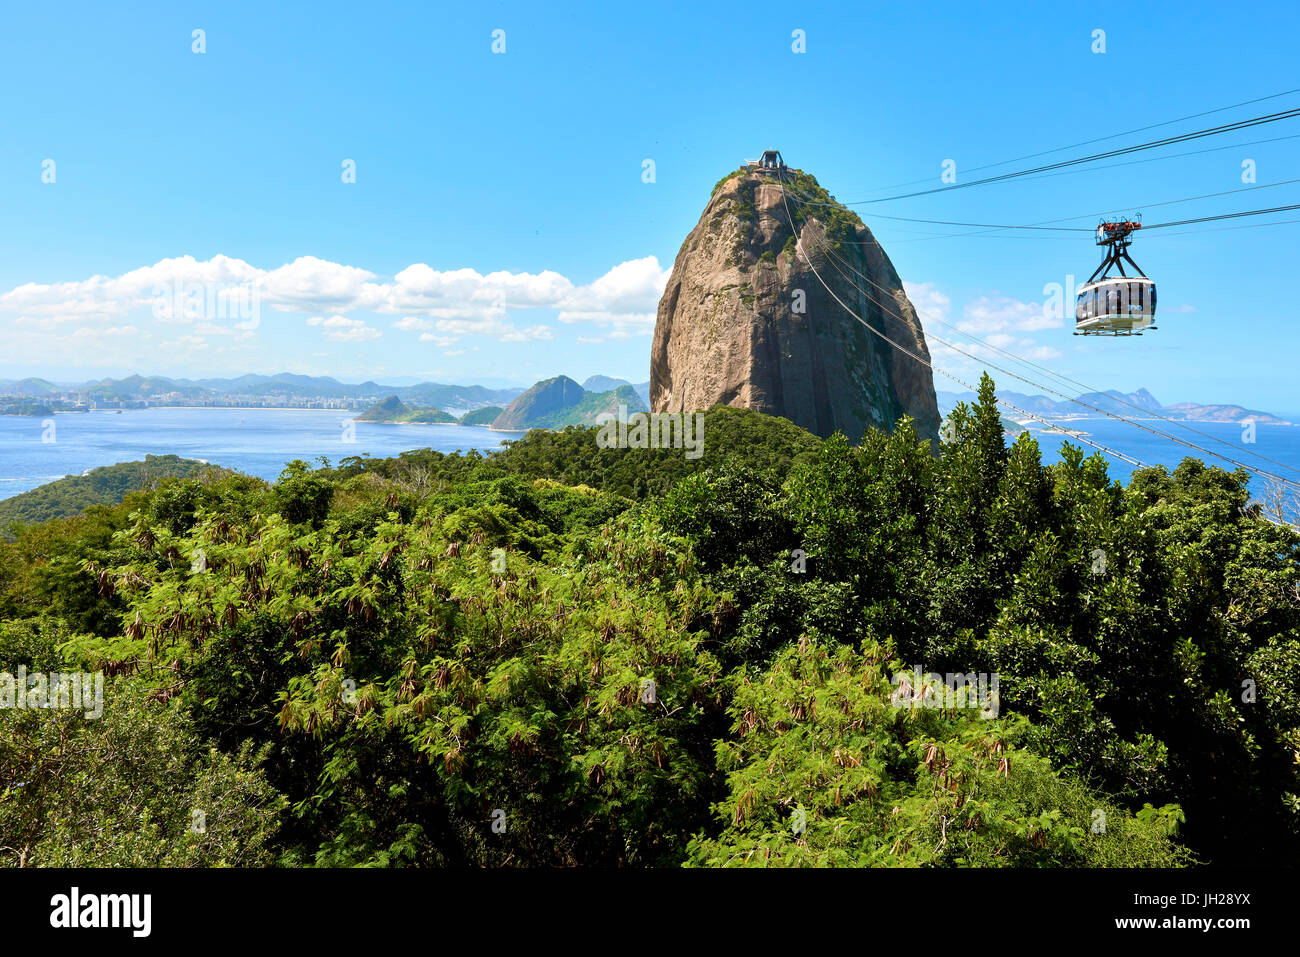 Cable car heading to Sugarloaf mountain seen from Morro da Urca, the first stop of the cable car, Rio de Janeiro, Brazil Stock Photo